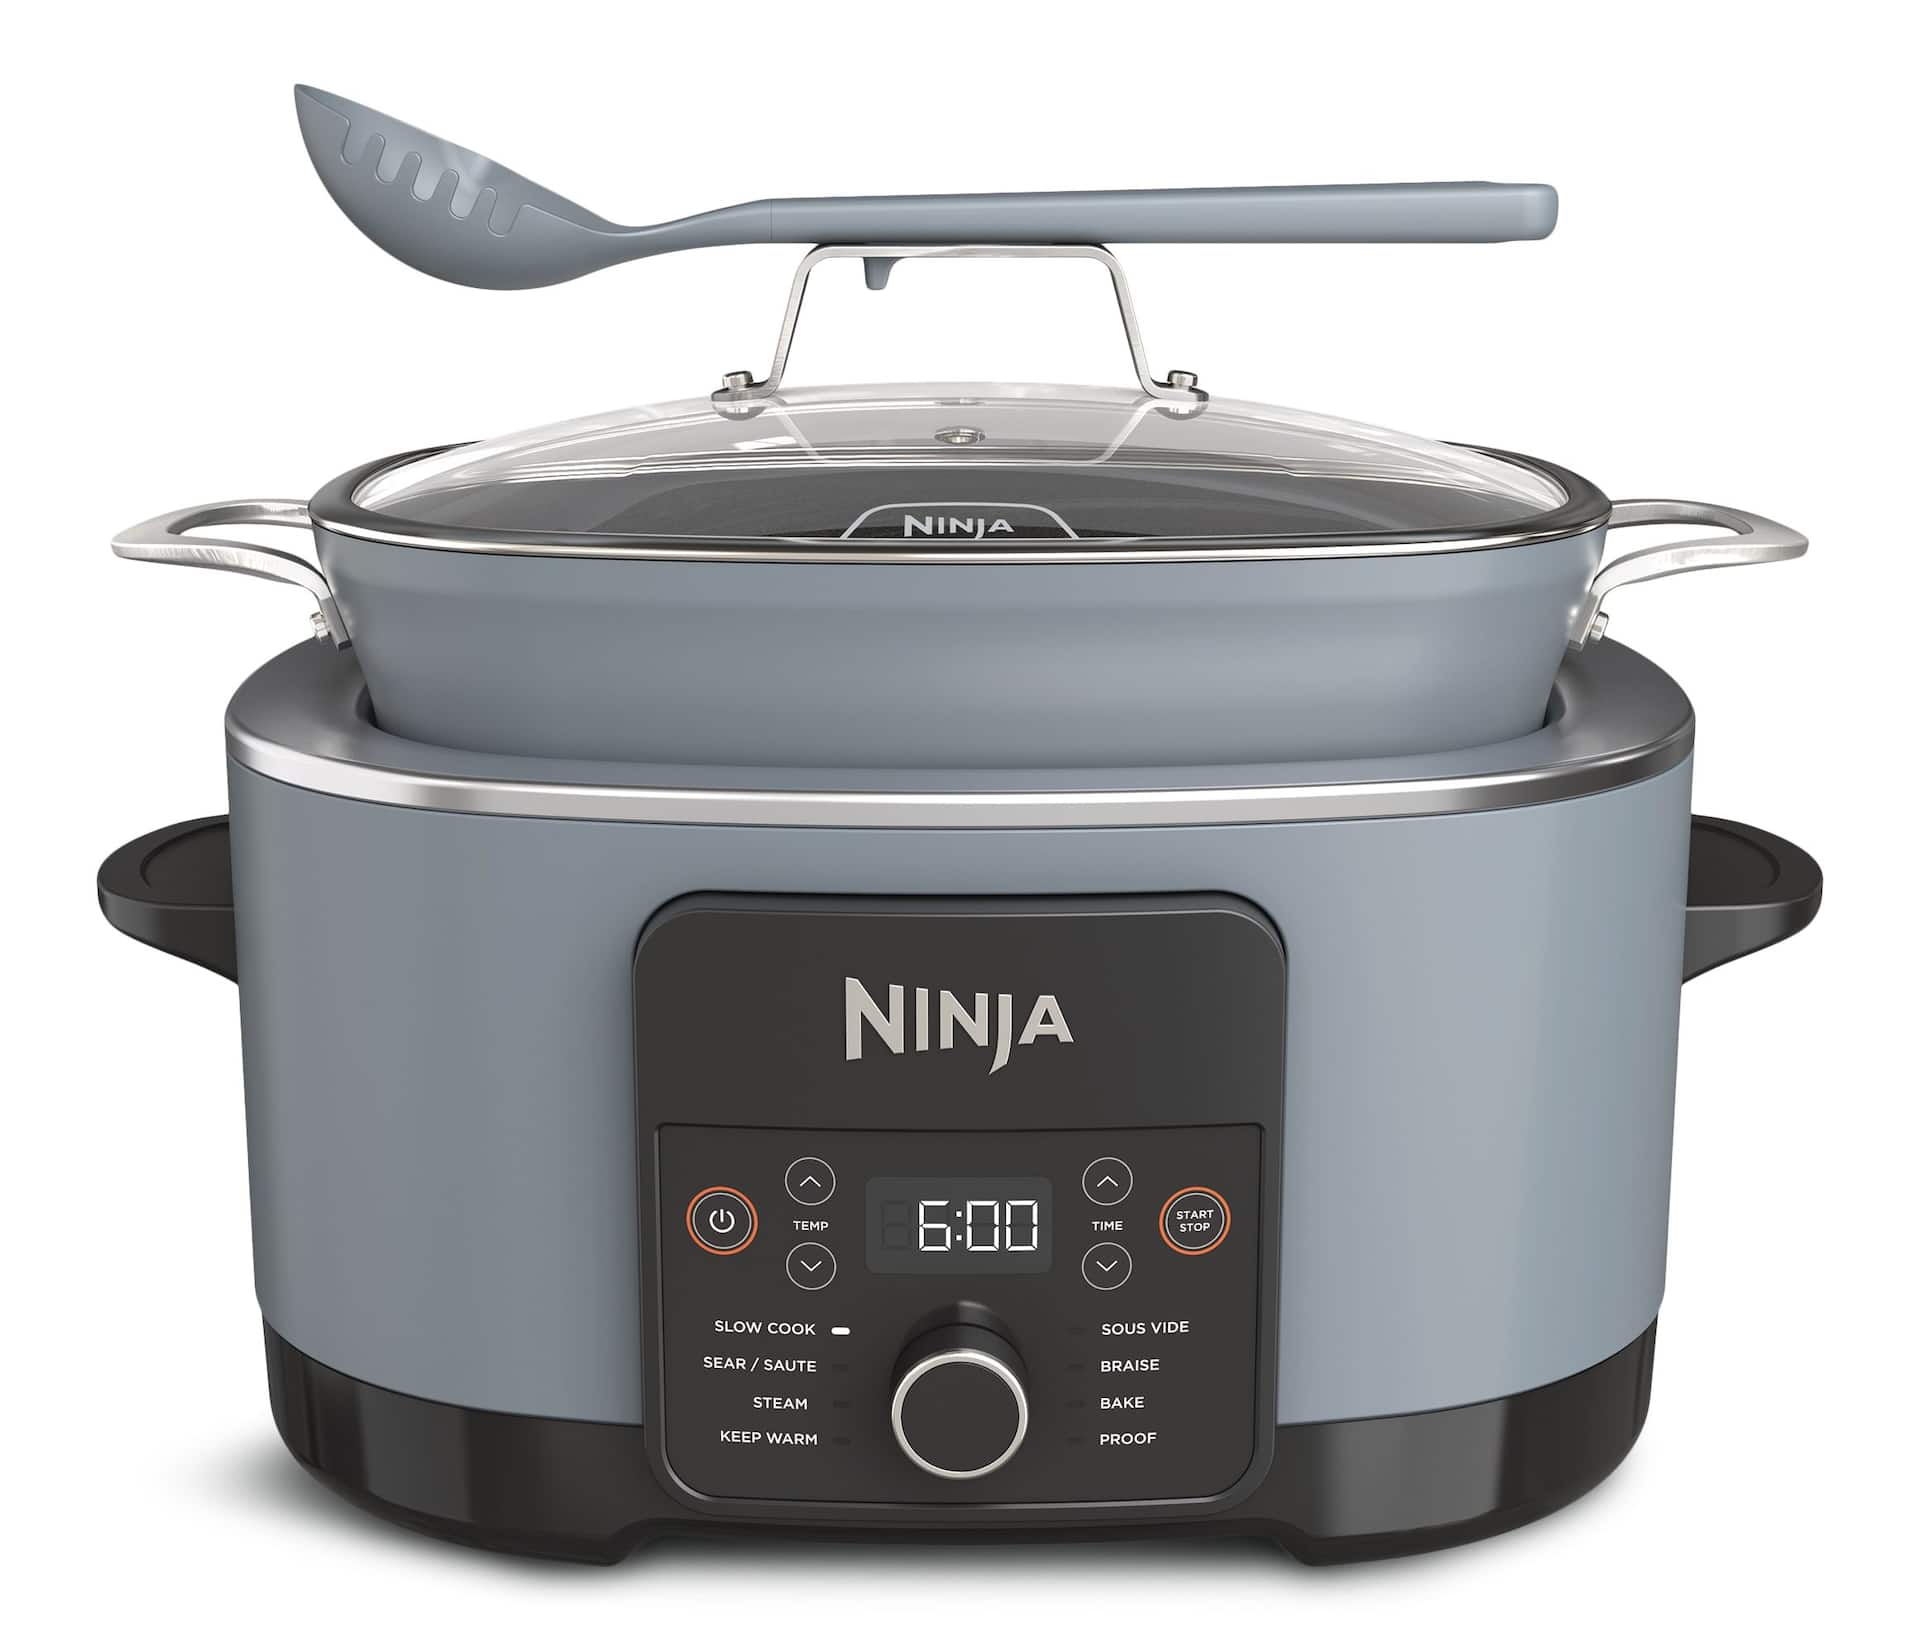 https://media-www.canadiantire.ca/product/living/kitchen/kitchen-appliances/0430326/ninja-8-in-1-function-possible-cooker-8-5-qt-08738248-259b-4cc4-8418-86a8bd40d346-jpgrendition.jpg